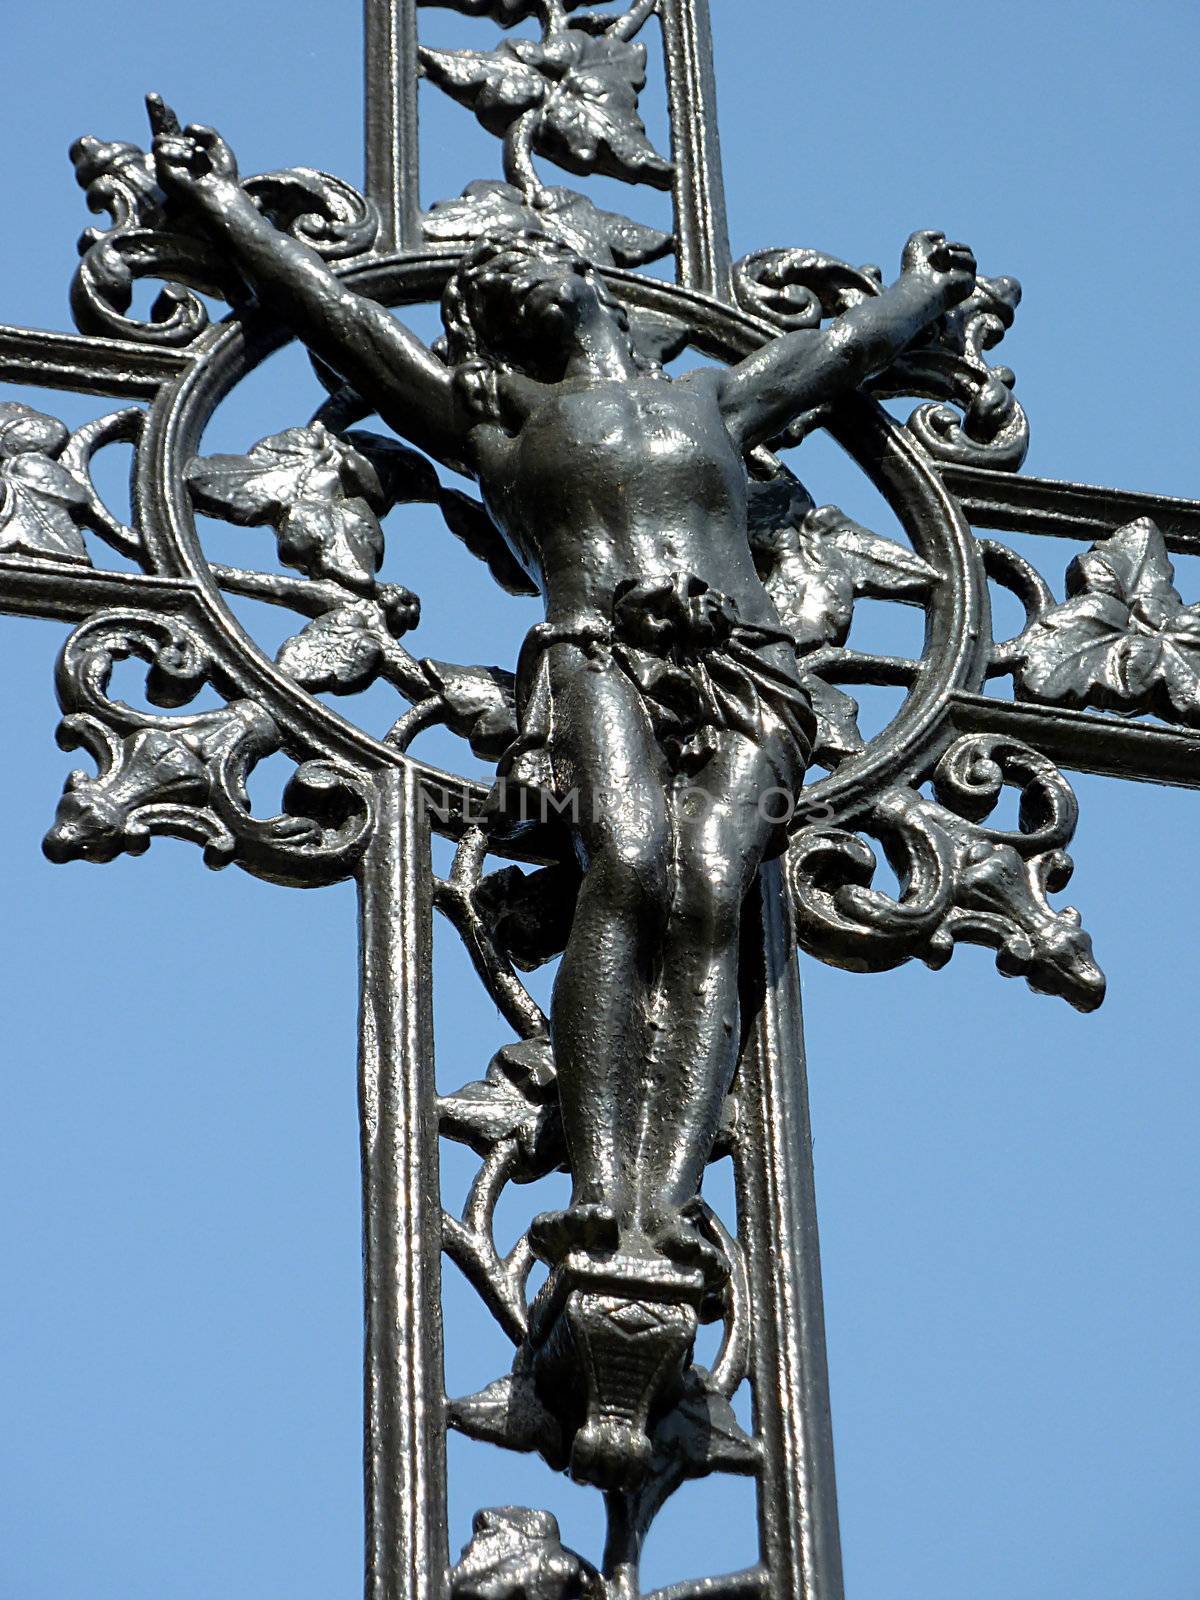 Jesus cross made of black metal with lots of decorations around and blue sky behind